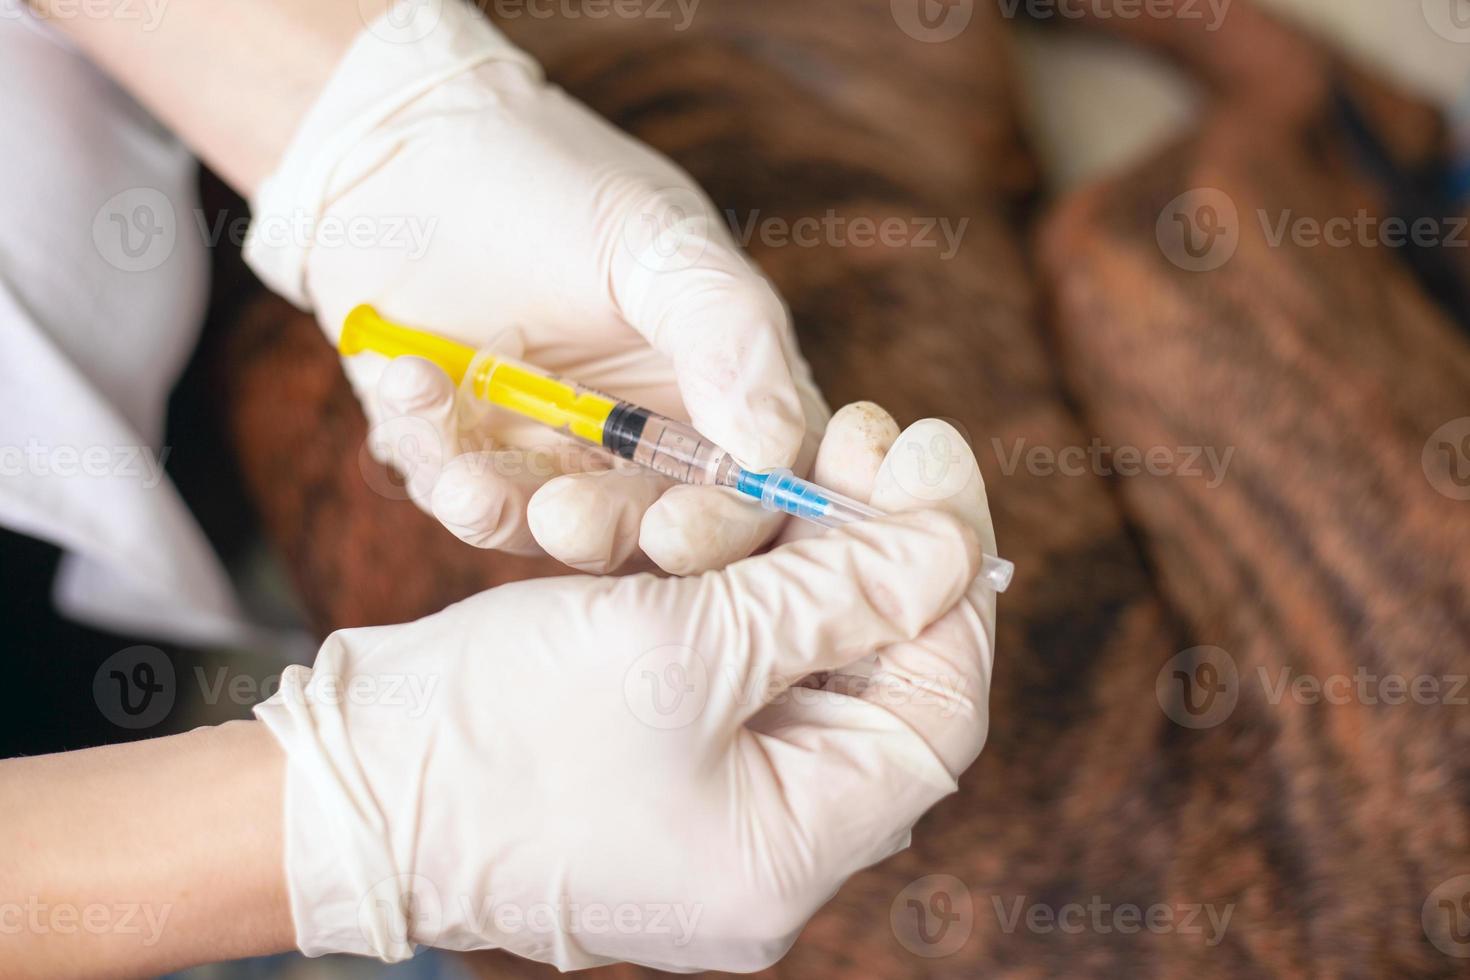 Veterinarian doctor preparing to give an injection to a sick dog photo